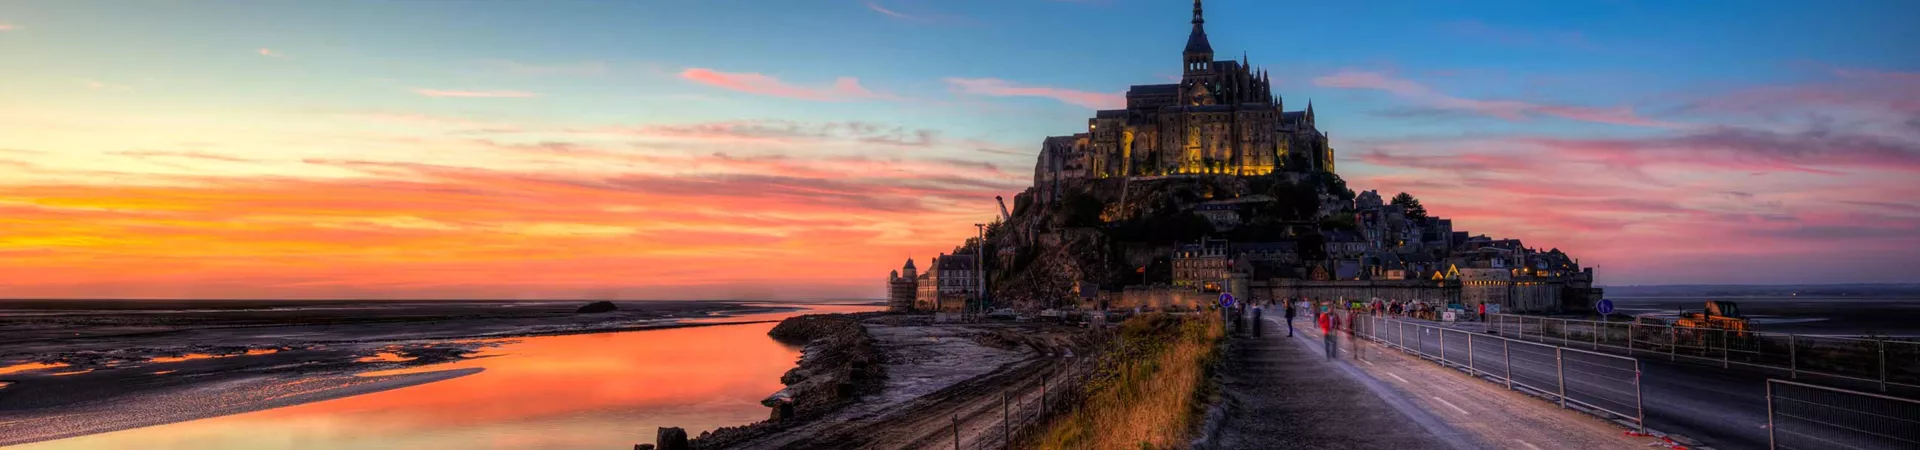 A scenic view of Mont Saint Michel by sunset, France